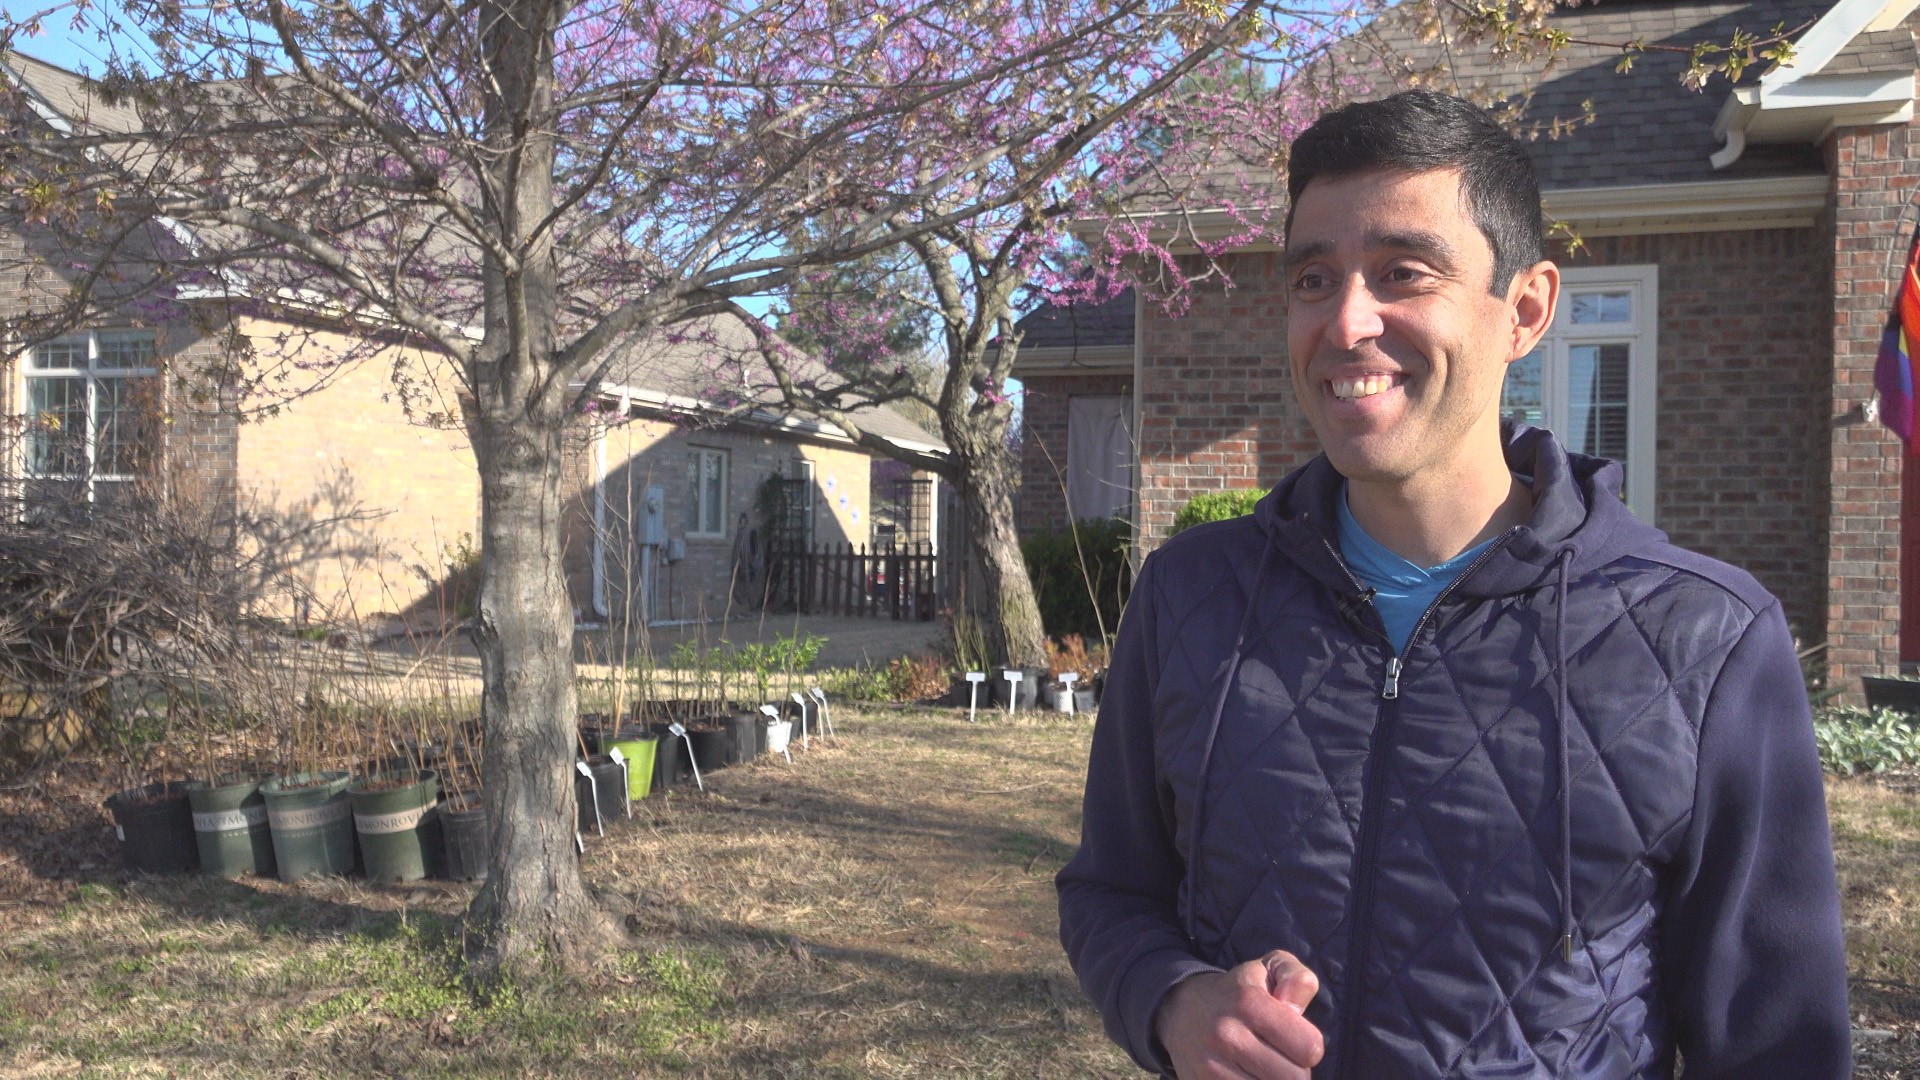 5NEWS REPORTER JOSE CARRANZA INTRODUCES US TO A BENTONVILLE MAN GROWING HUNDREDS OF TREES IN HIS BACKYARD - ALL TO HELP THE EARTH...